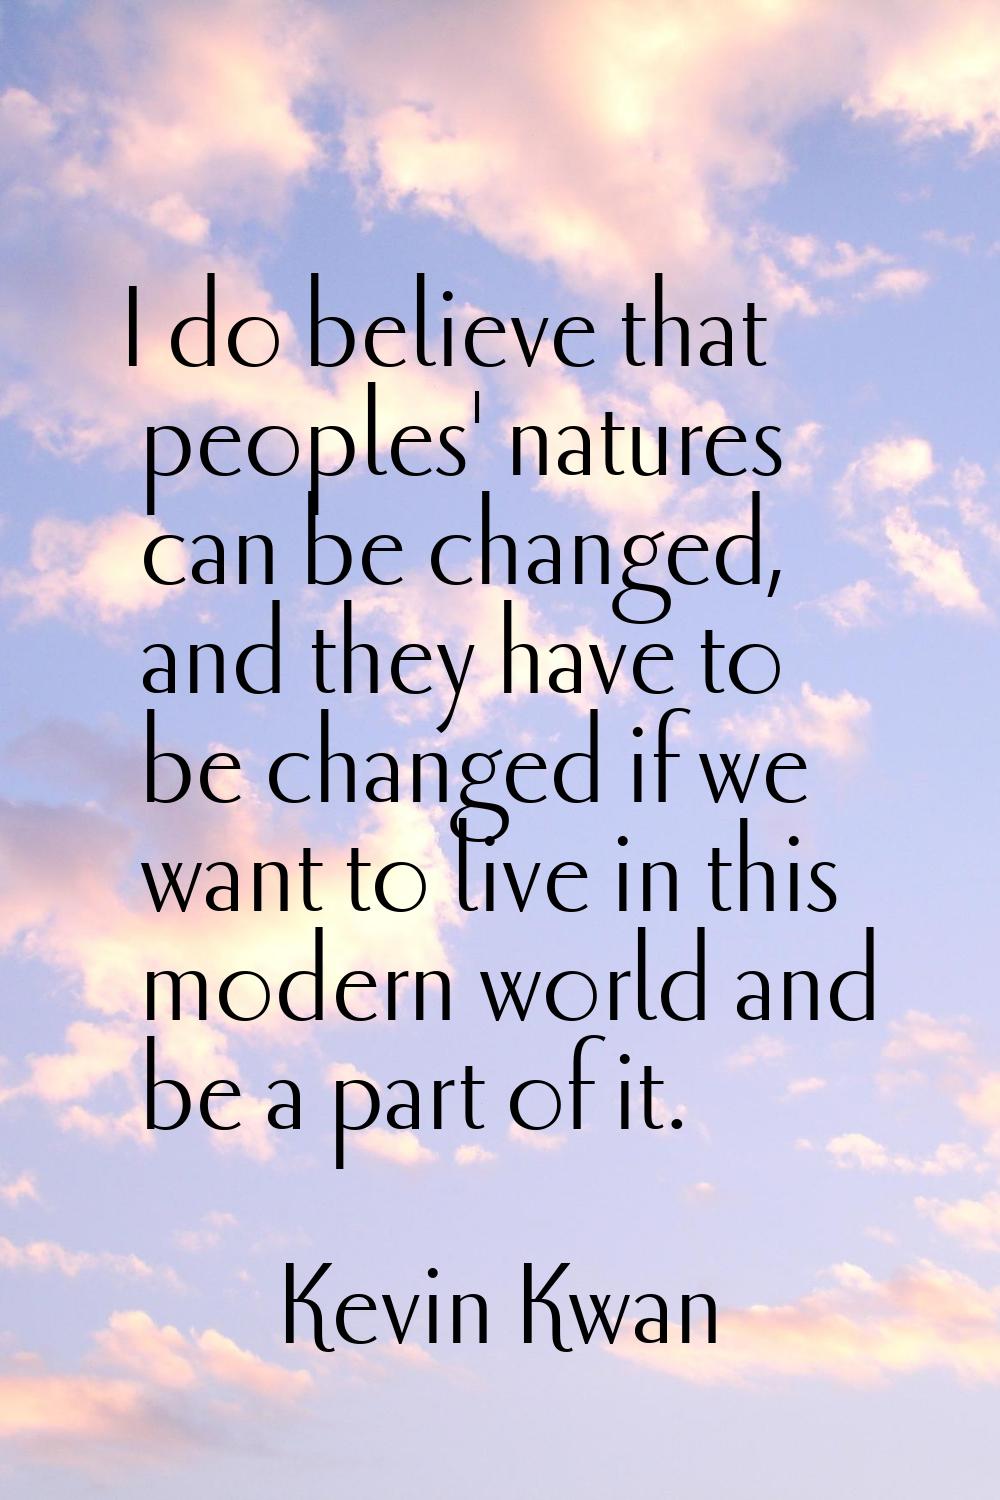 I do believe that peoples' natures can be changed, and they have to be changed if we want to live i